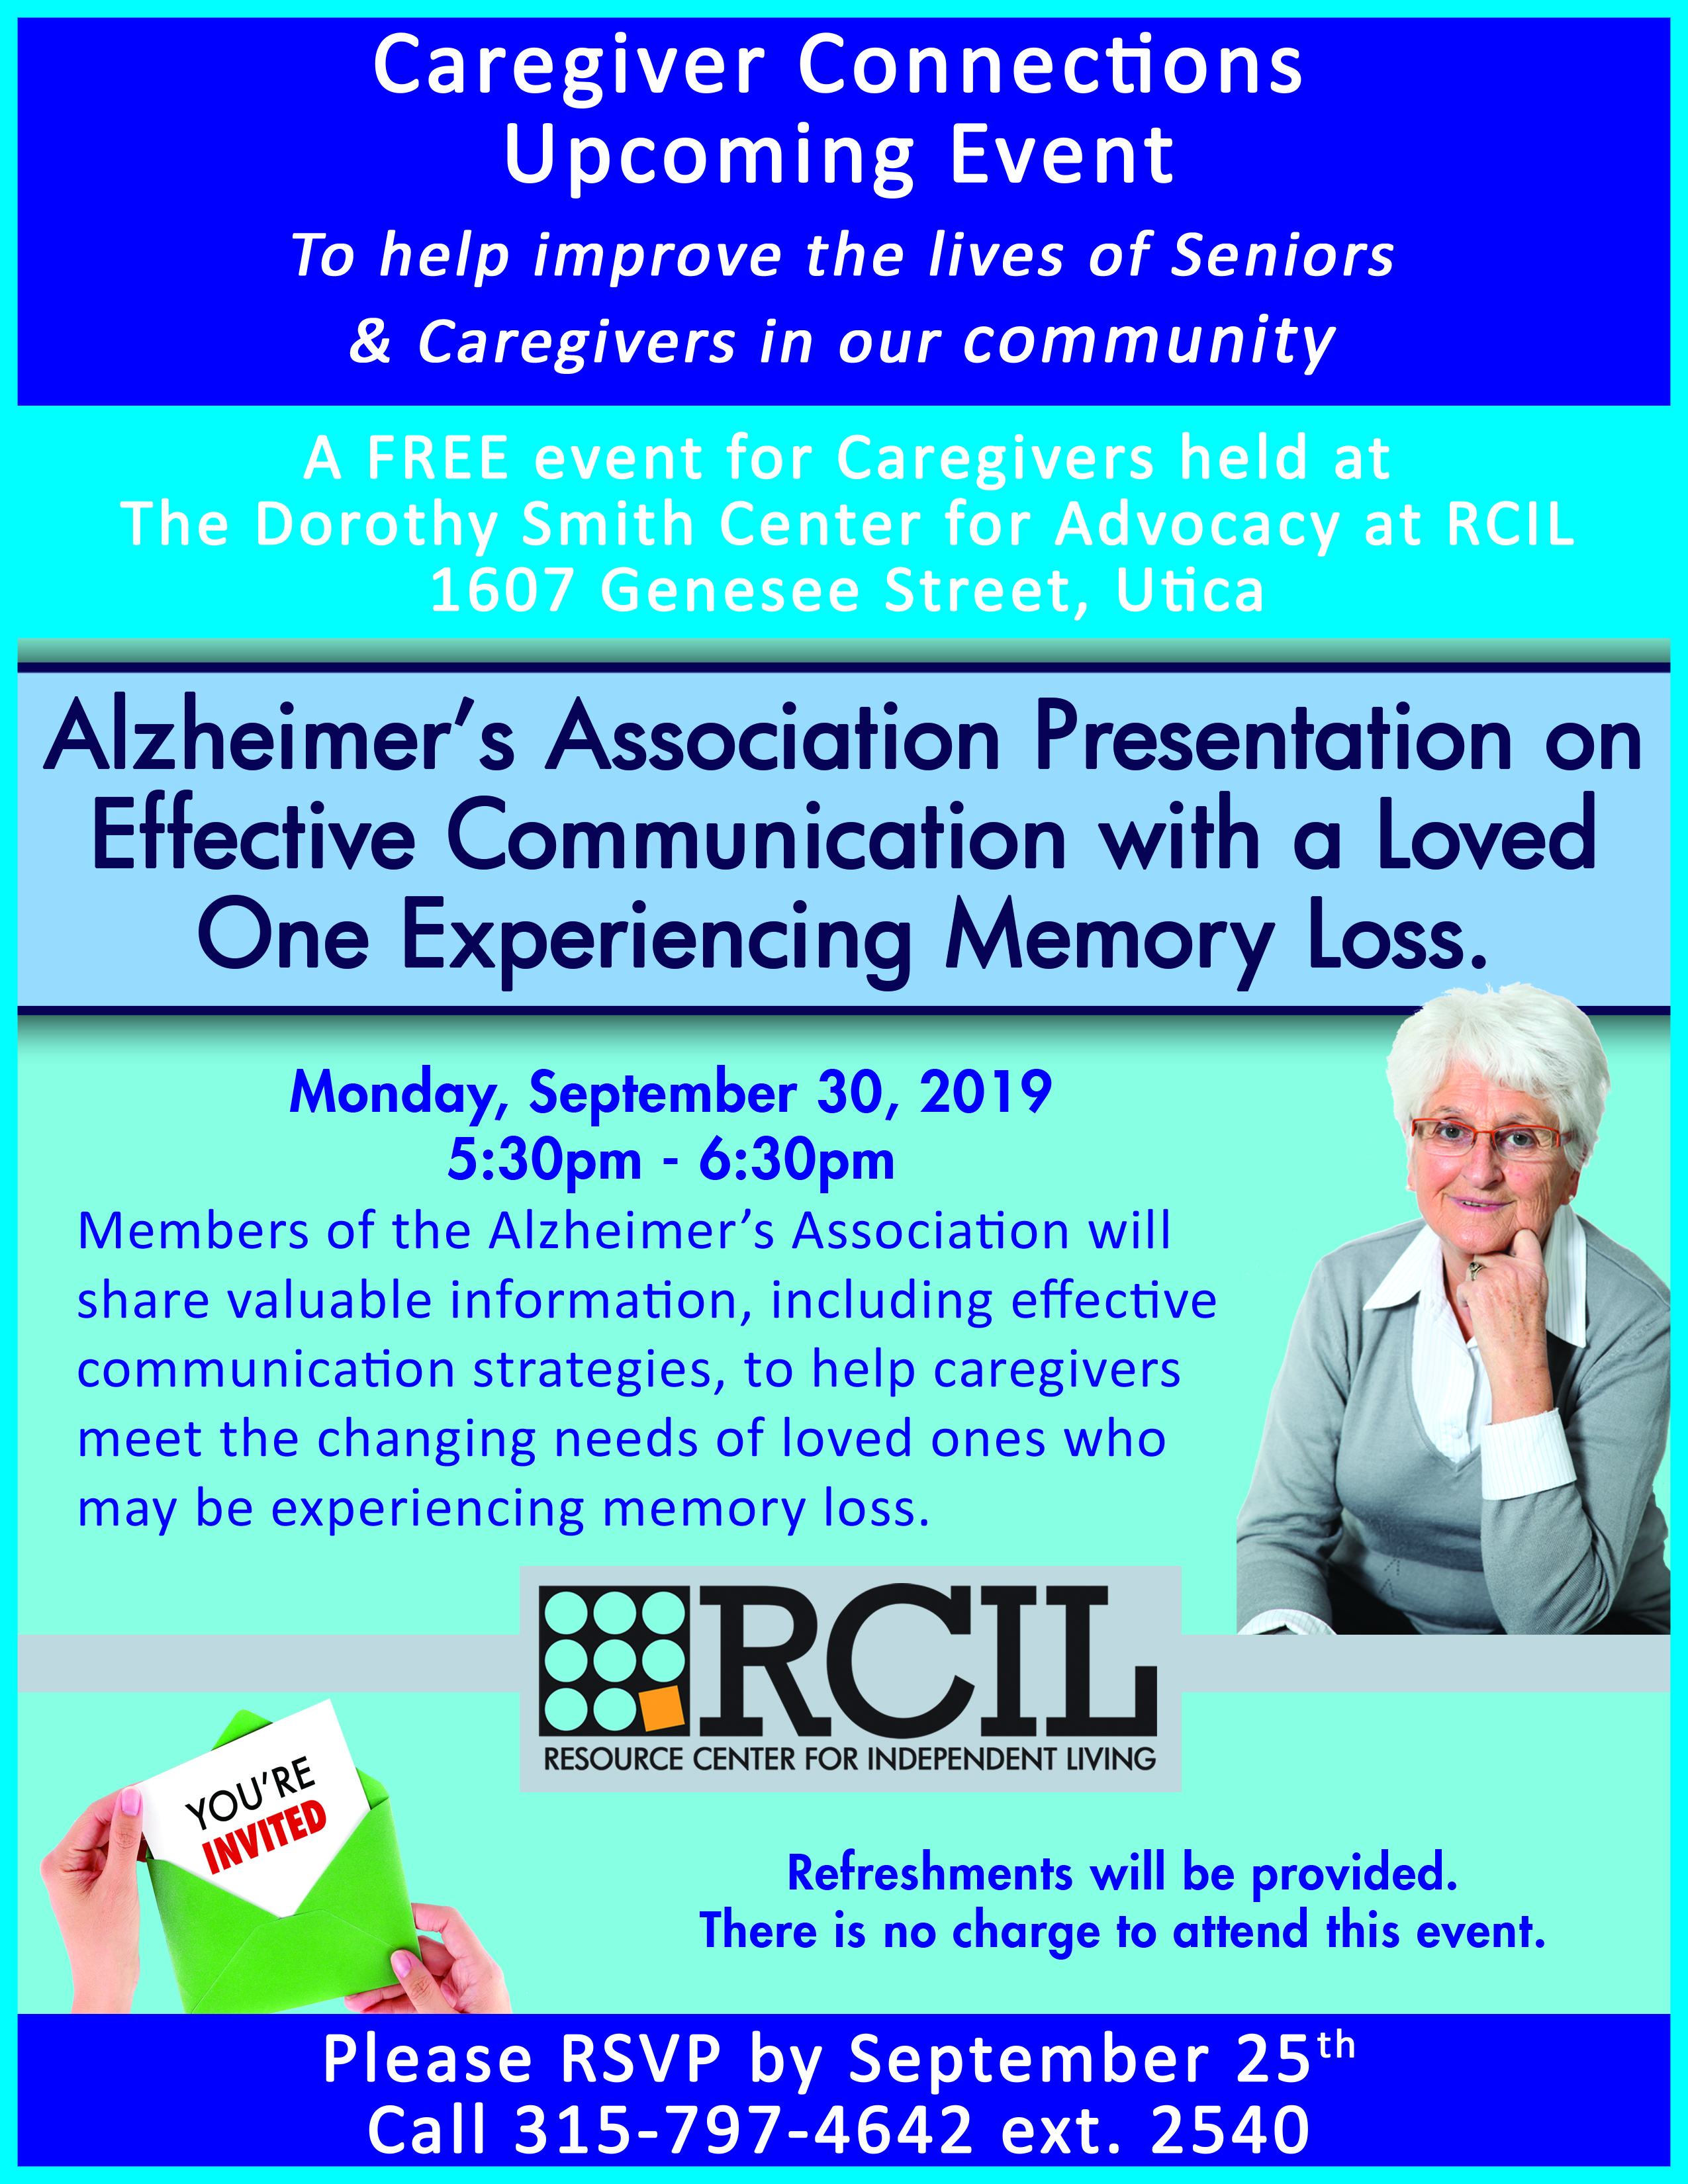 Blue flyer with image of a smiling female caregiver and hands opening an envelope pulling out a card that reads You're Invited. Monday September 30 from 5:30 to 6:30pm at 1607 Genesee Street in Utica. Members of the Alzheimer's Association will share valuable information, including effective communication strategies, to help caregivers meet the changing needs of loved ones who may be experiencing memory loss. Please RSVP by September 25th by calling 315-797-4642 ext 2540. 